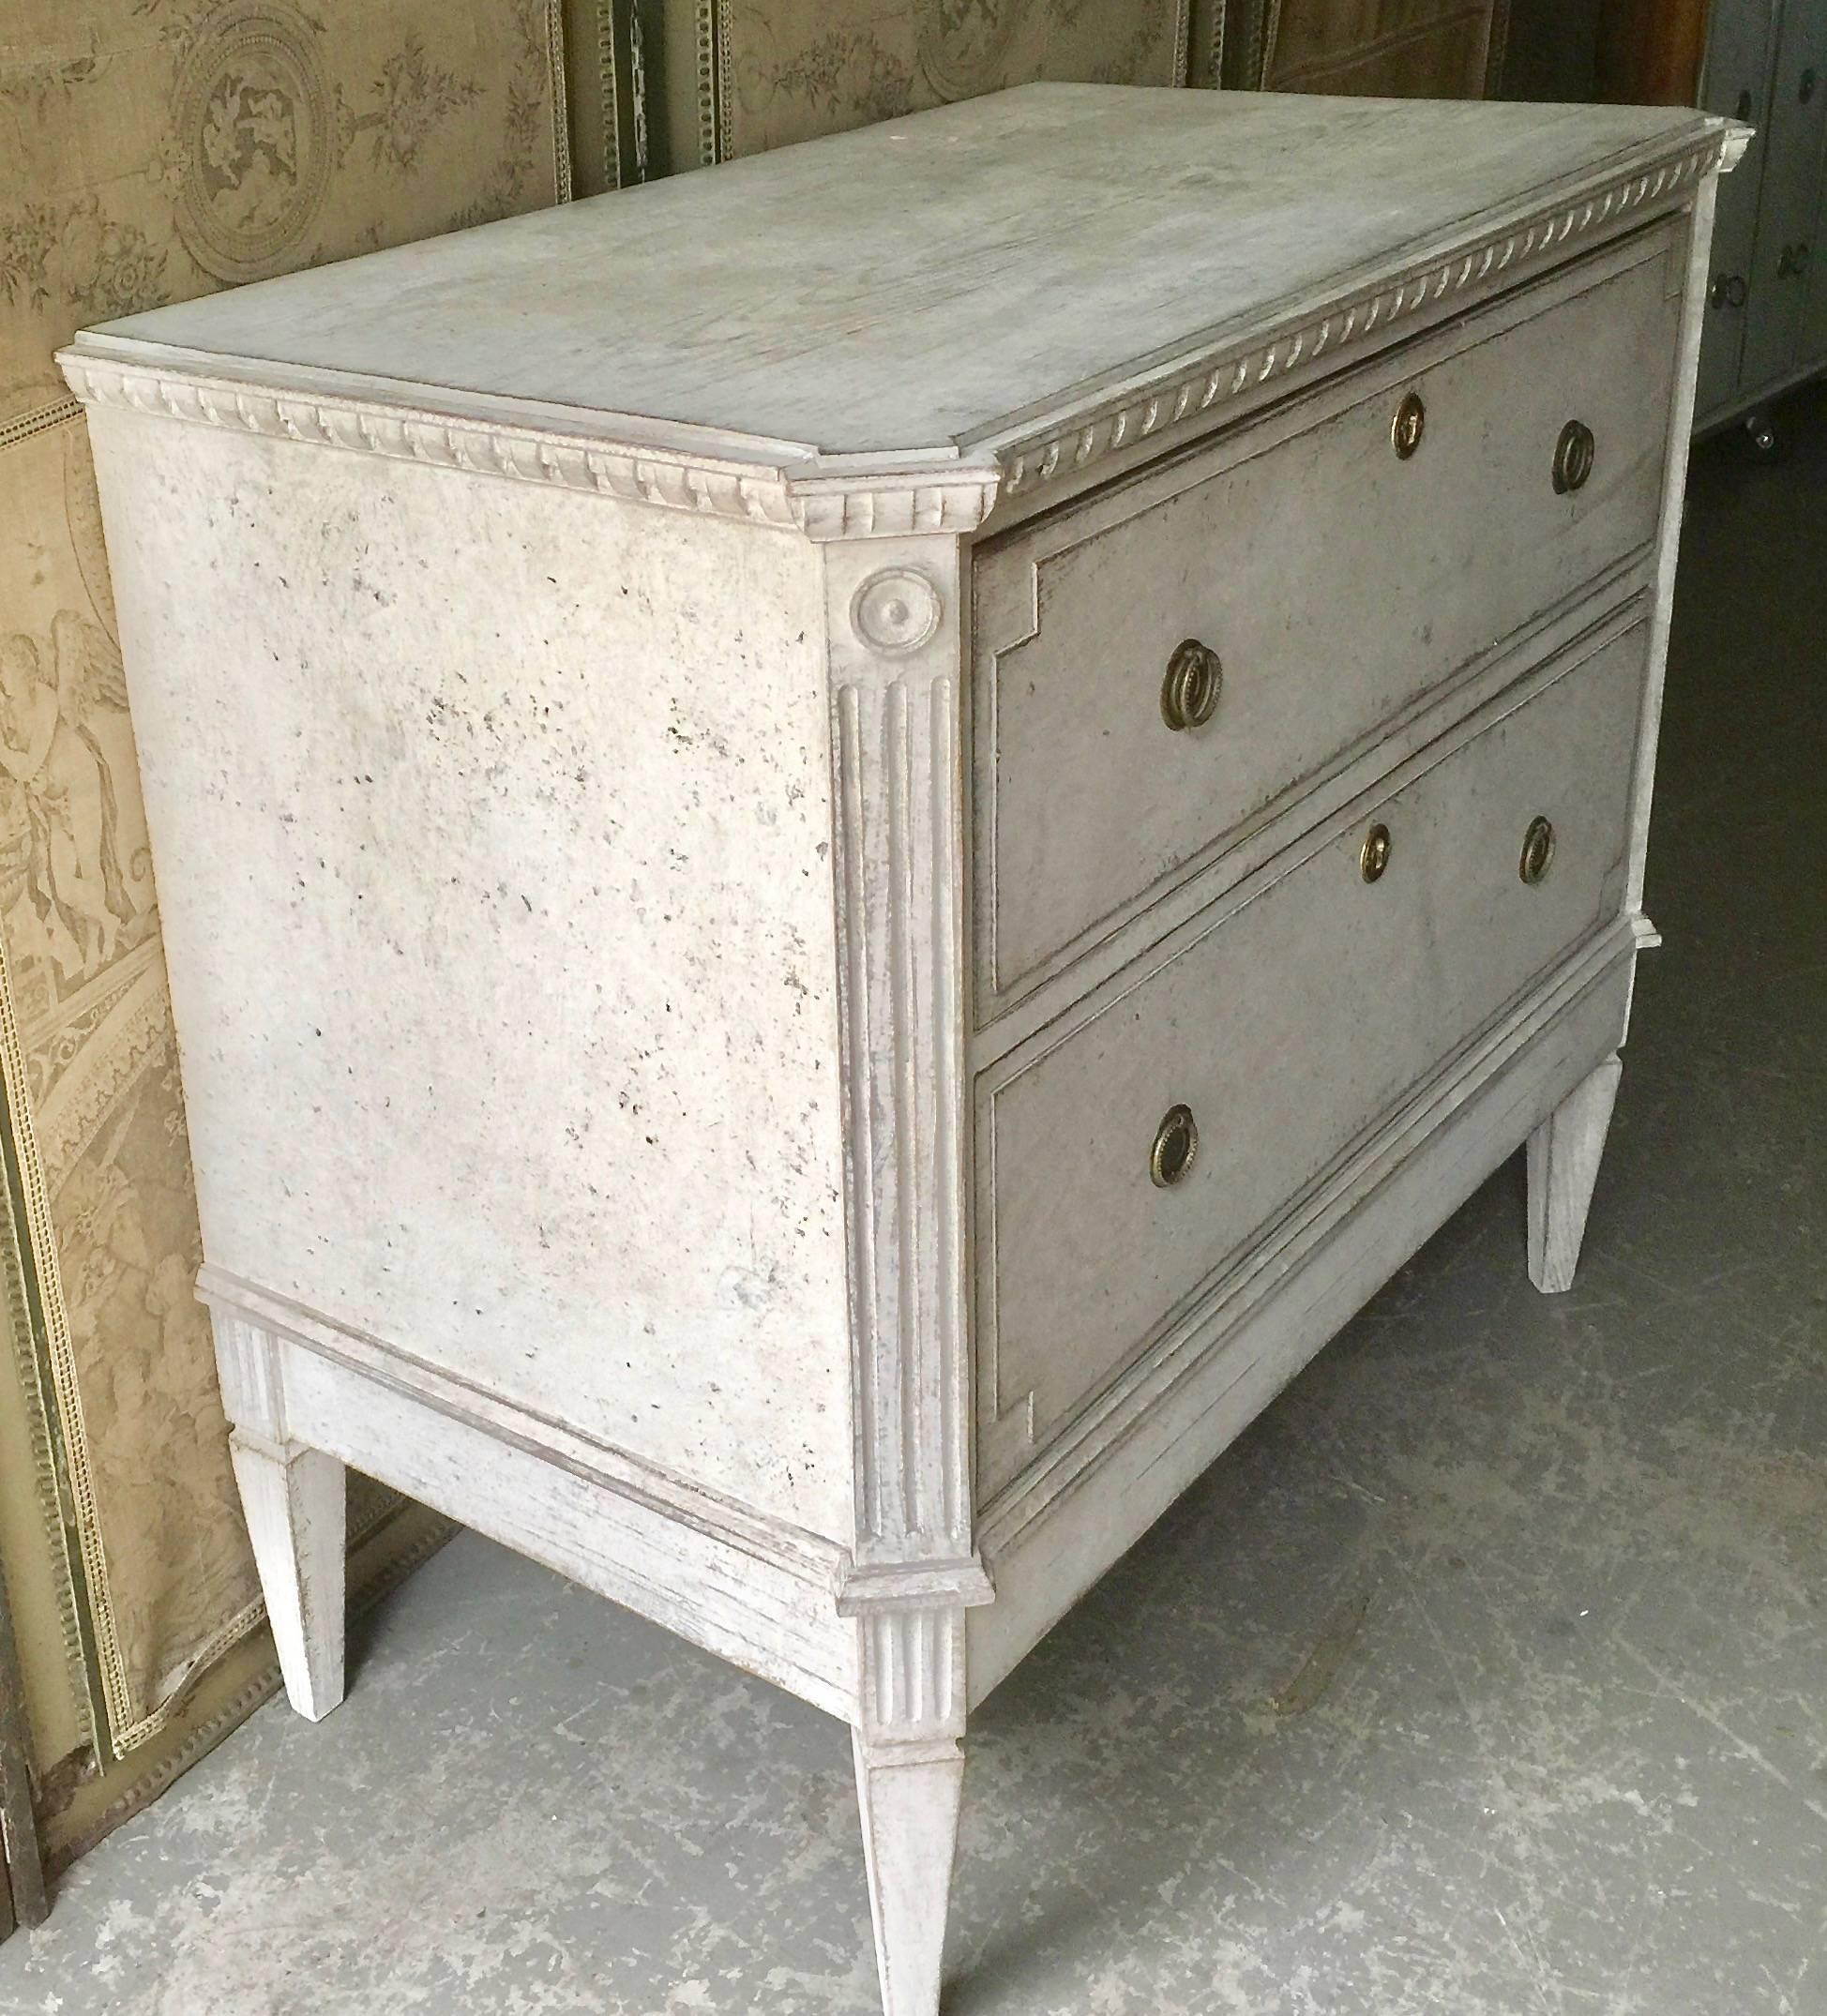 Early 19th Century Swedish period Gustavian chest of drawers with brass fittings, shaped top and canted corners posts with fluted and medallion details. 
Sweden, circa 1810.
More than ever, we selected the best, the rarest, the unusual, the